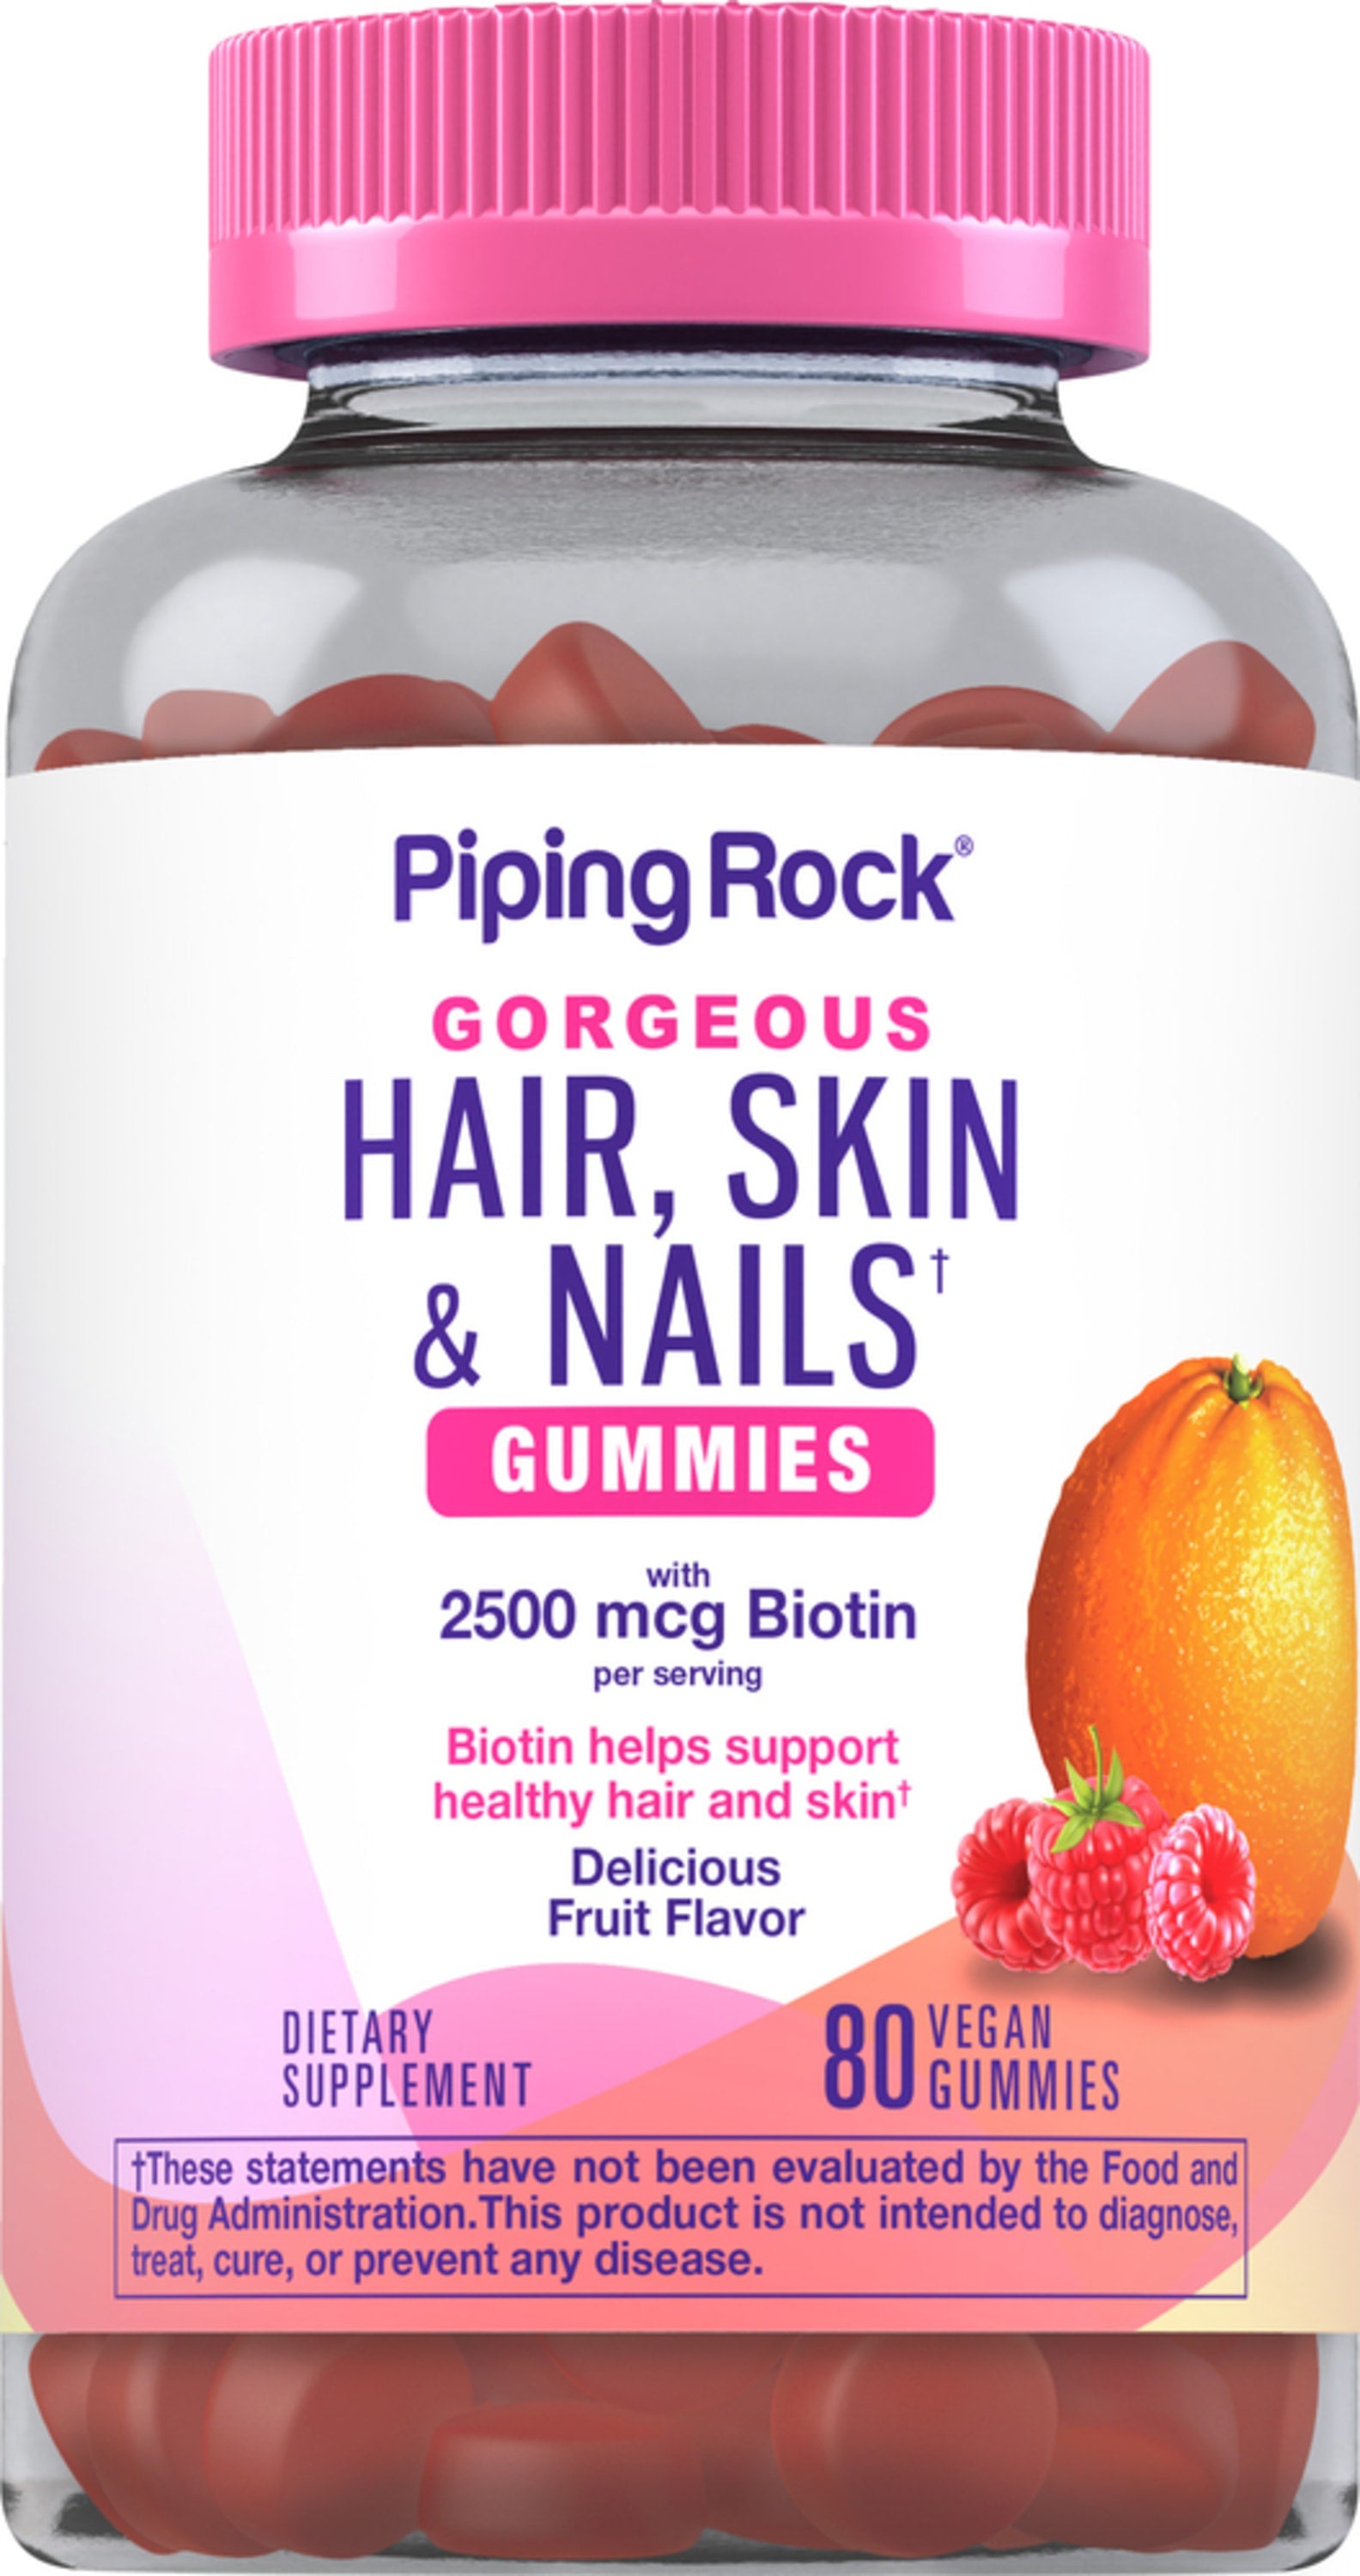 BEST HAIR, SKIN AND NAILS GUMMIES | foreverlifeusa